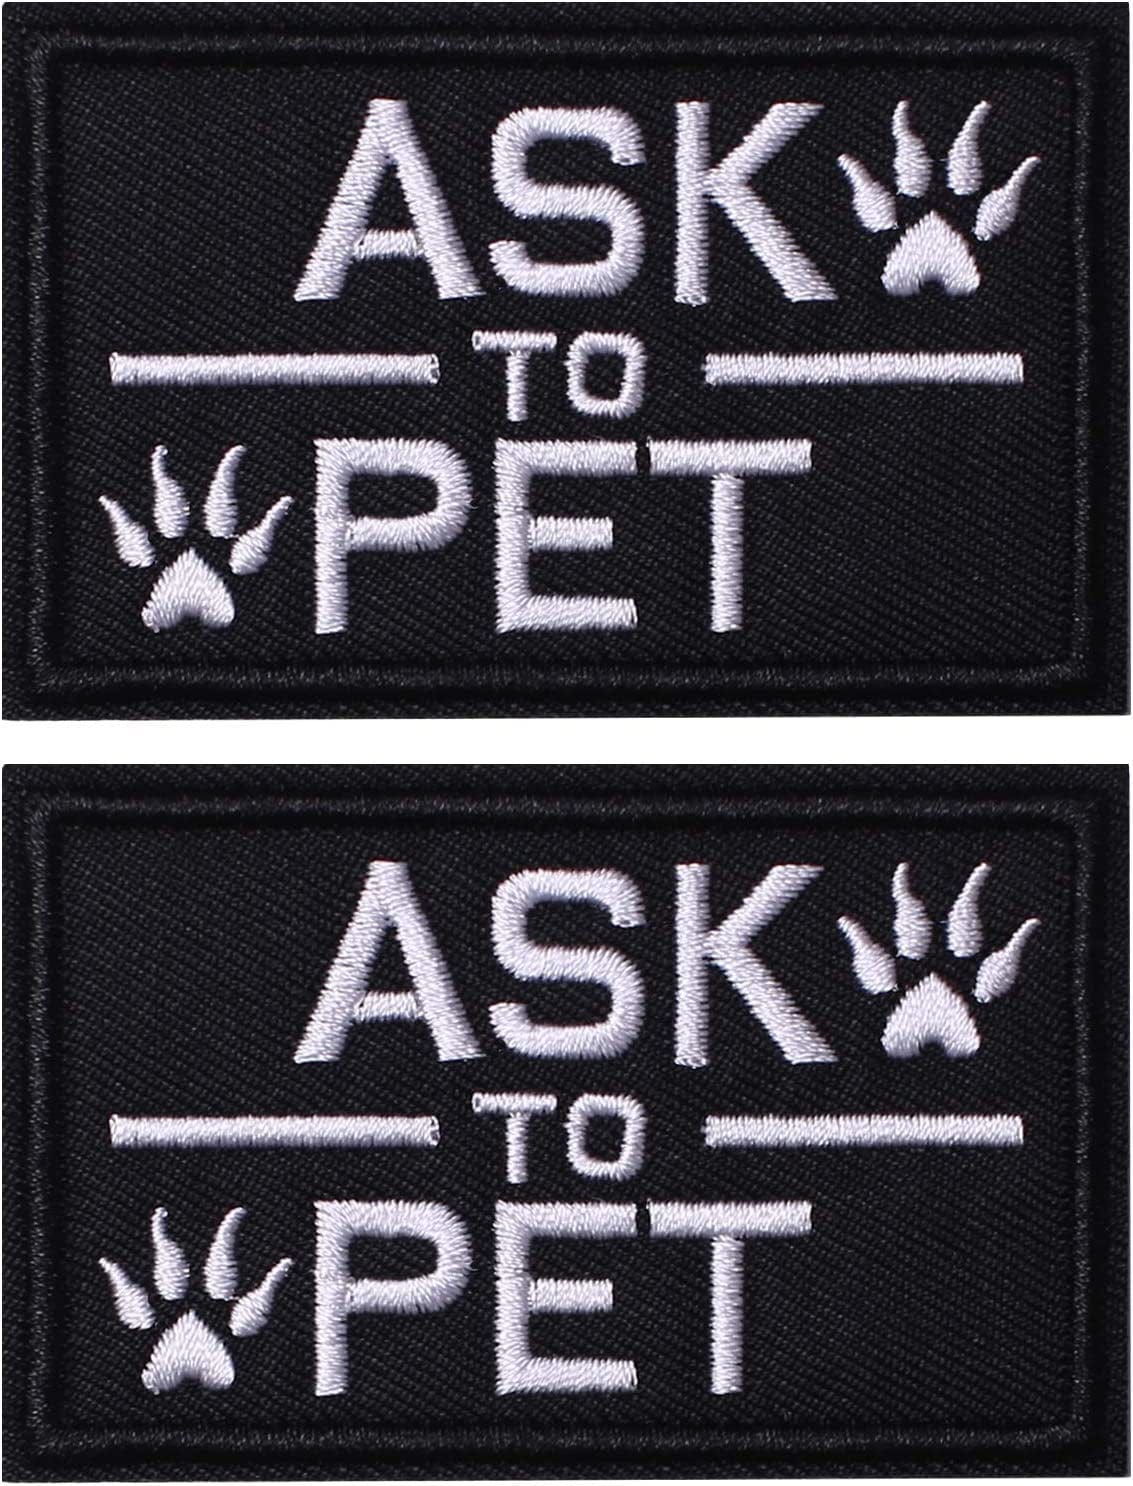 10 Pieces Service Dog Patches Ask to Do Not Pet Patch Vest